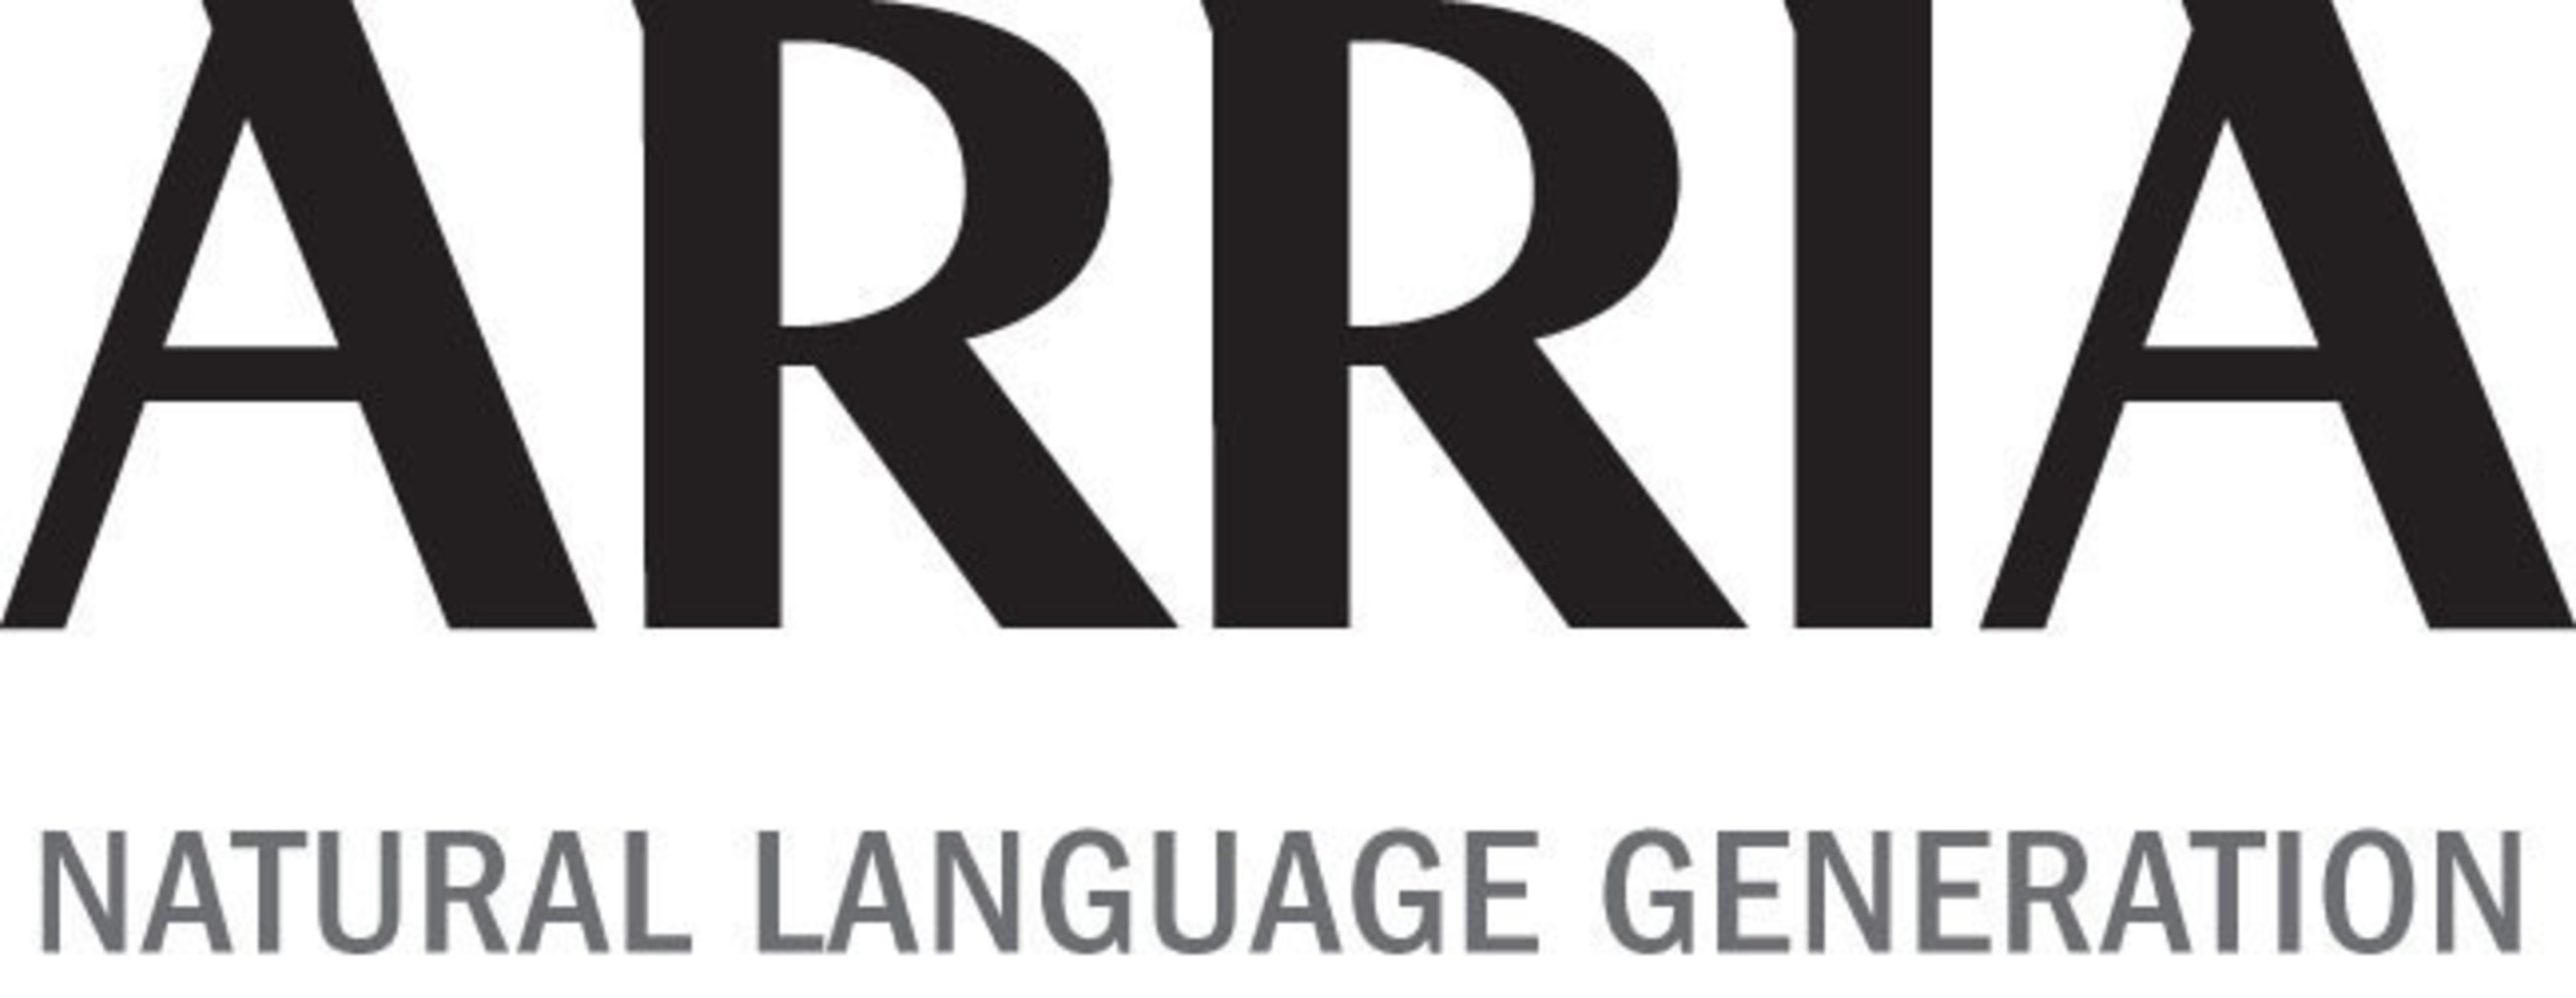 Arria NLG's core product is known as the Arria NLG Platform, a form of artificial intelligence software, specialized in extracting information from complex data sources and communicating that information in natural language.